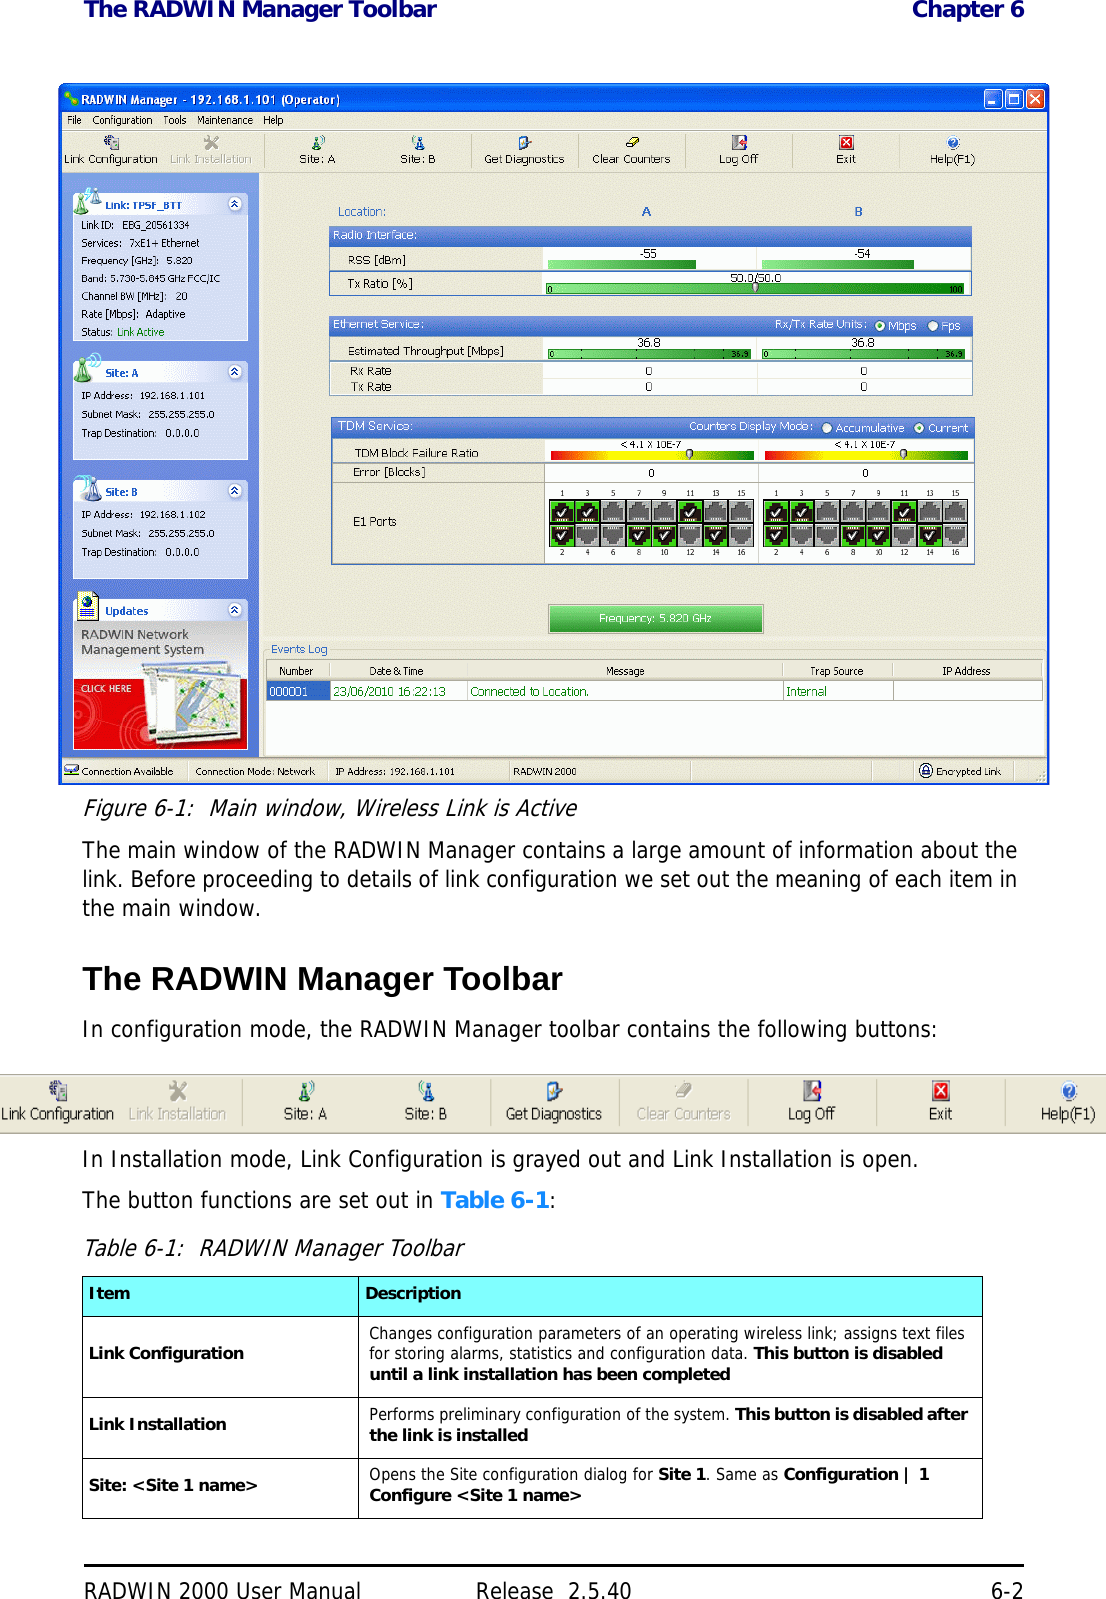 The RADWIN Manager Toolbar Chapter 6RADWIN 2000 User Manual Release  2.5.40 6-2Figure 6-1:  Main window, Wireless Link is ActiveThe main window of the RADWIN Manager contains a large amount of information about the link. Before proceeding to details of link configuration we set out the meaning of each item in the main window.The RADWIN Manager ToolbarIn configuration mode, the RADWIN Manager toolbar contains the following buttons:In Installation mode, Link Configuration is grayed out and Link Installation is open.The button functions are set out in Table 6-1:Table 6-1:  RADWIN Manager ToolbarItem DescriptionLink Configuration Changes configuration parameters of an operating wireless link; assigns text files for storing alarms, statistics and configuration data. This button is disabled until a link installation has been completedLink Installation Performs preliminary configuration of the system. This button is disabled after the link is installedSite: &lt;Site 1 name&gt; Opens the Site configuration dialog for Site 1. Same as Configuration | 1 Configure &lt;Site 1 name&gt;